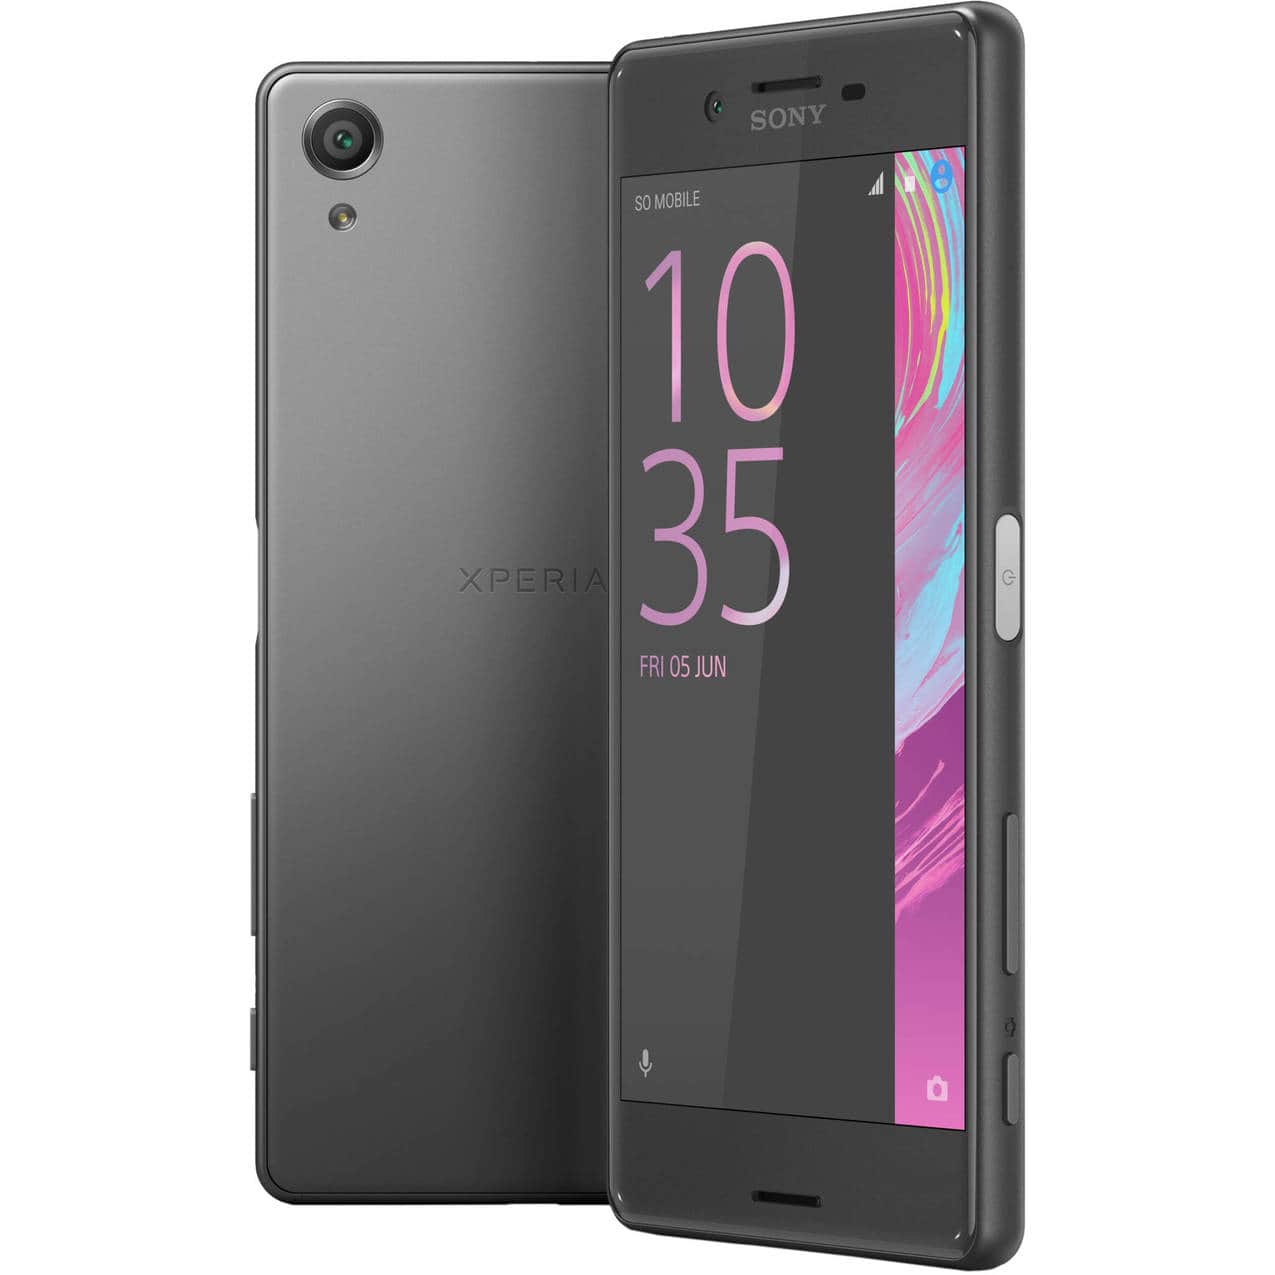 LineageOS 16.0 ROM for Sony Xperia X